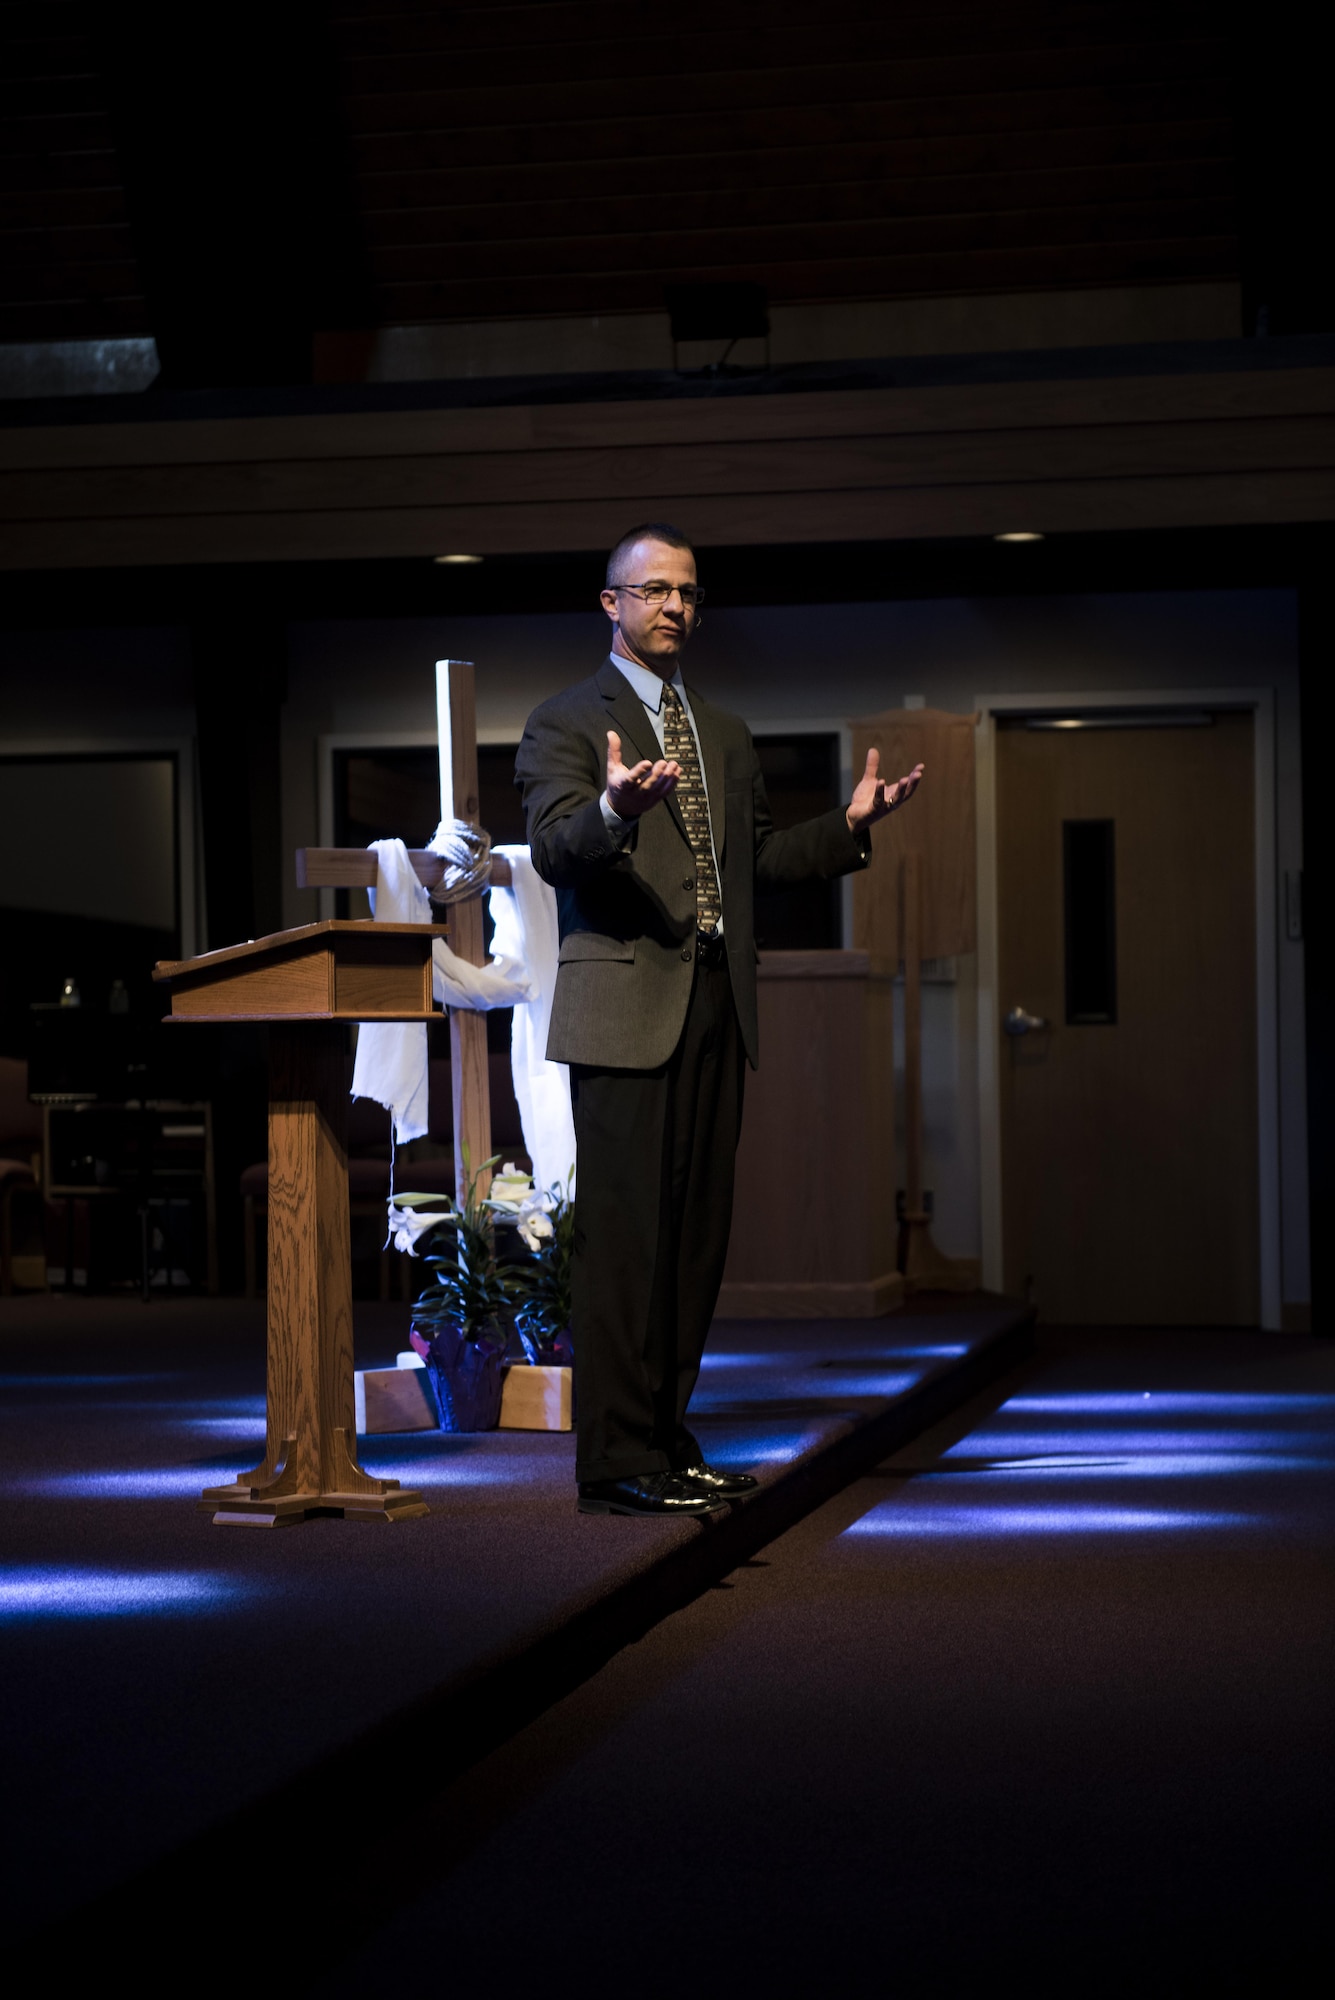 Capt. Jeffery McMillen, 92nd Air Refueling Wing chaplain, gives an Easter sermon April 16, 2017, at Fairchild Air Force Base, Washington. The chapel provides visits to units, pastoral counseling and hosts numerous events like marriage retreats and seminars. They also arrange trips for Airmen to go horseback riding, mountain biking and rock climbing. Other opportunities to do something different, change focus and hang out with fellow Airmen. (U.S. Air Force photo/Airman 1st Class Sean Campbell)